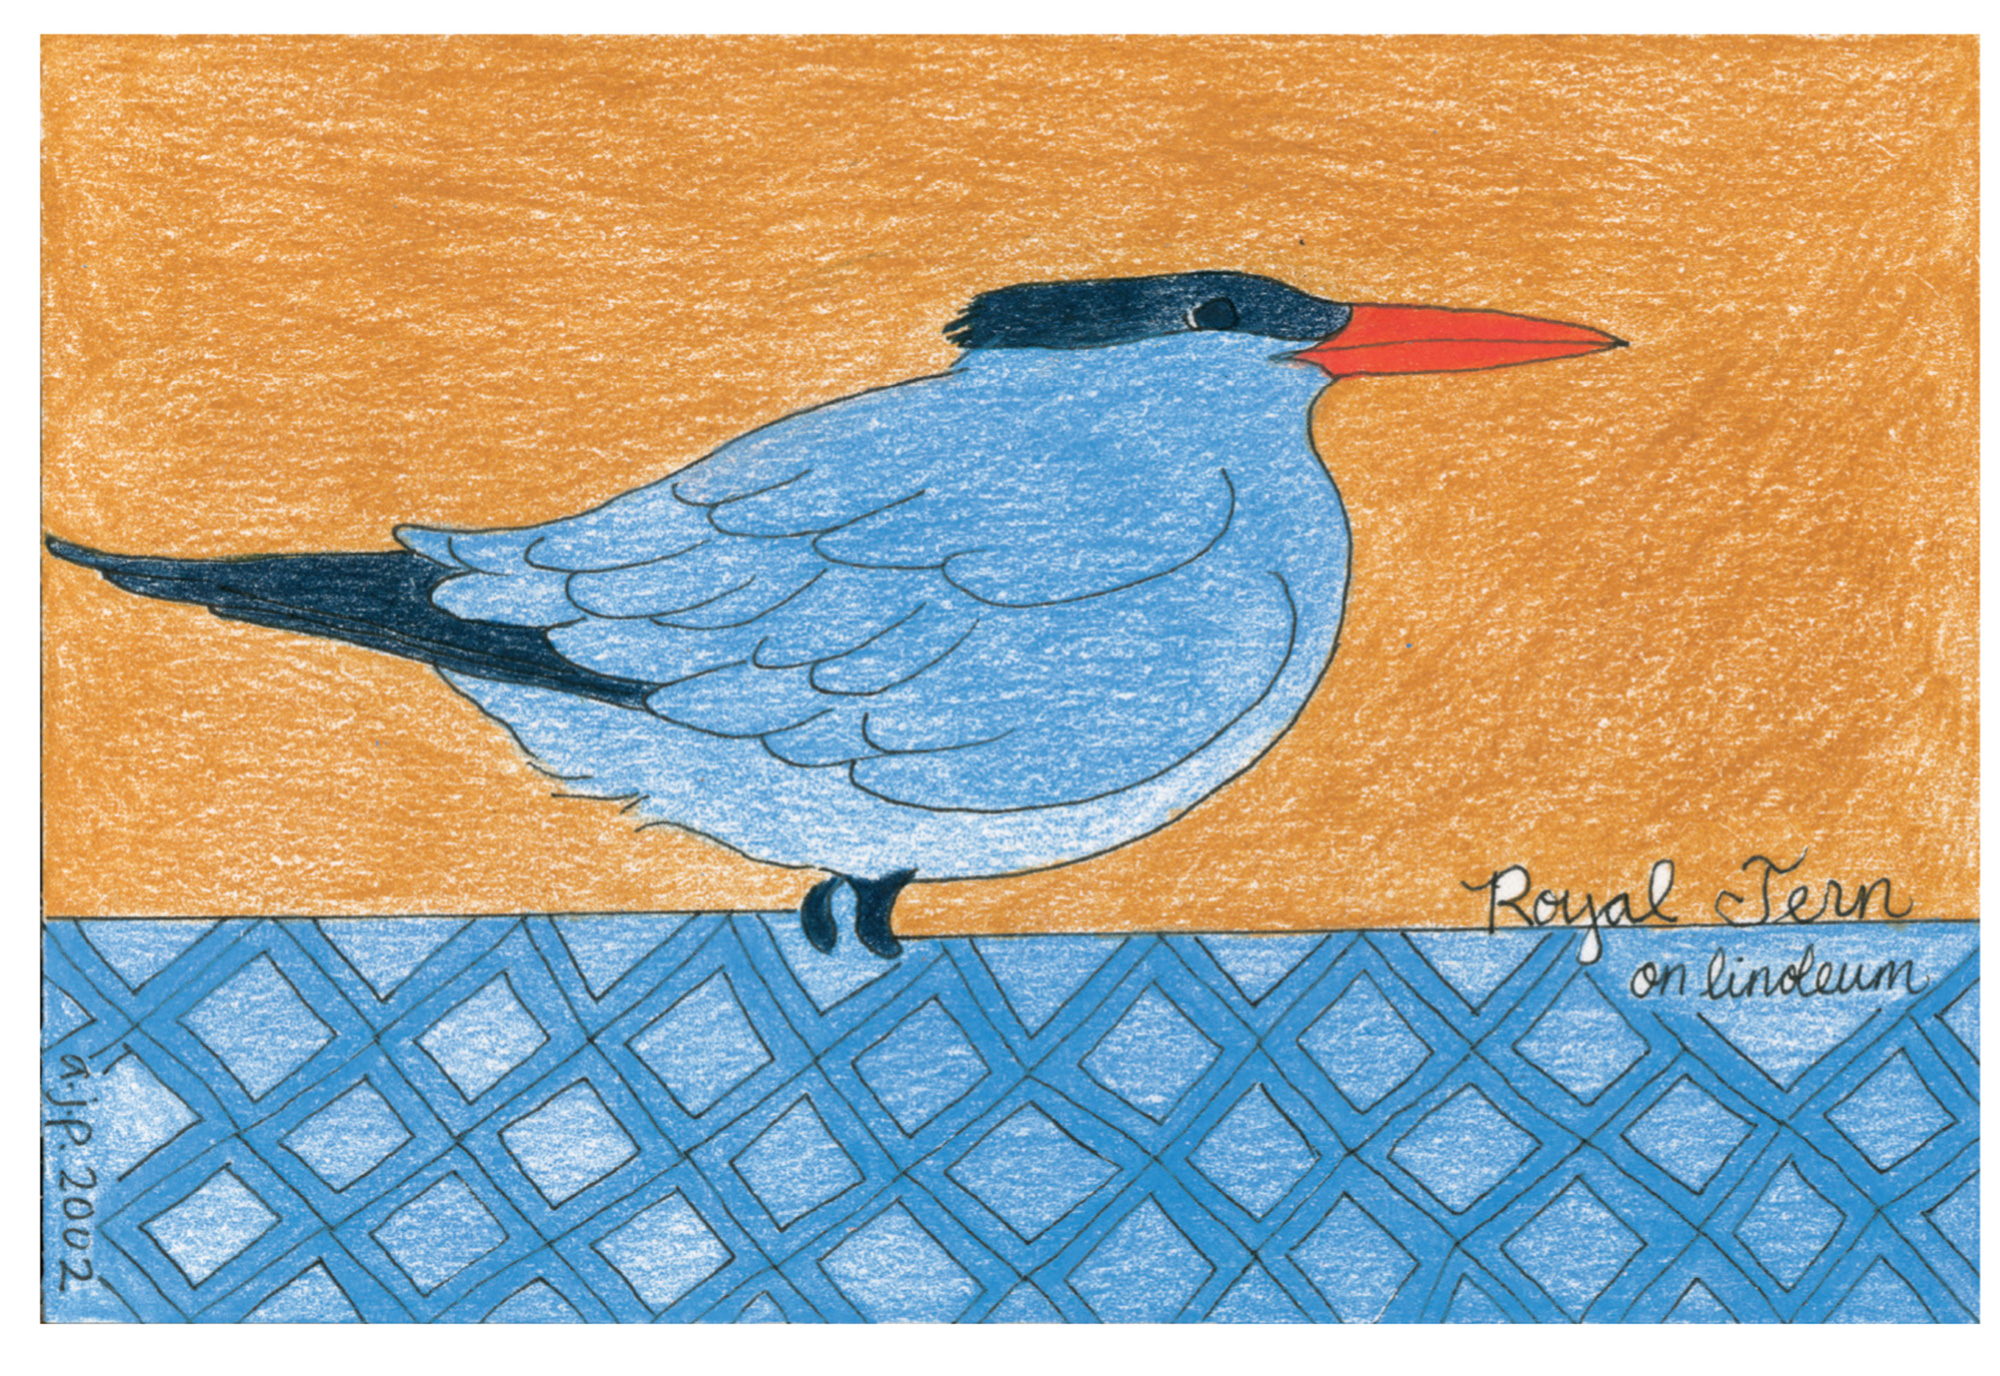 A 2002 drawing by Amy-Jean Porter of a royal tern on linoleum.